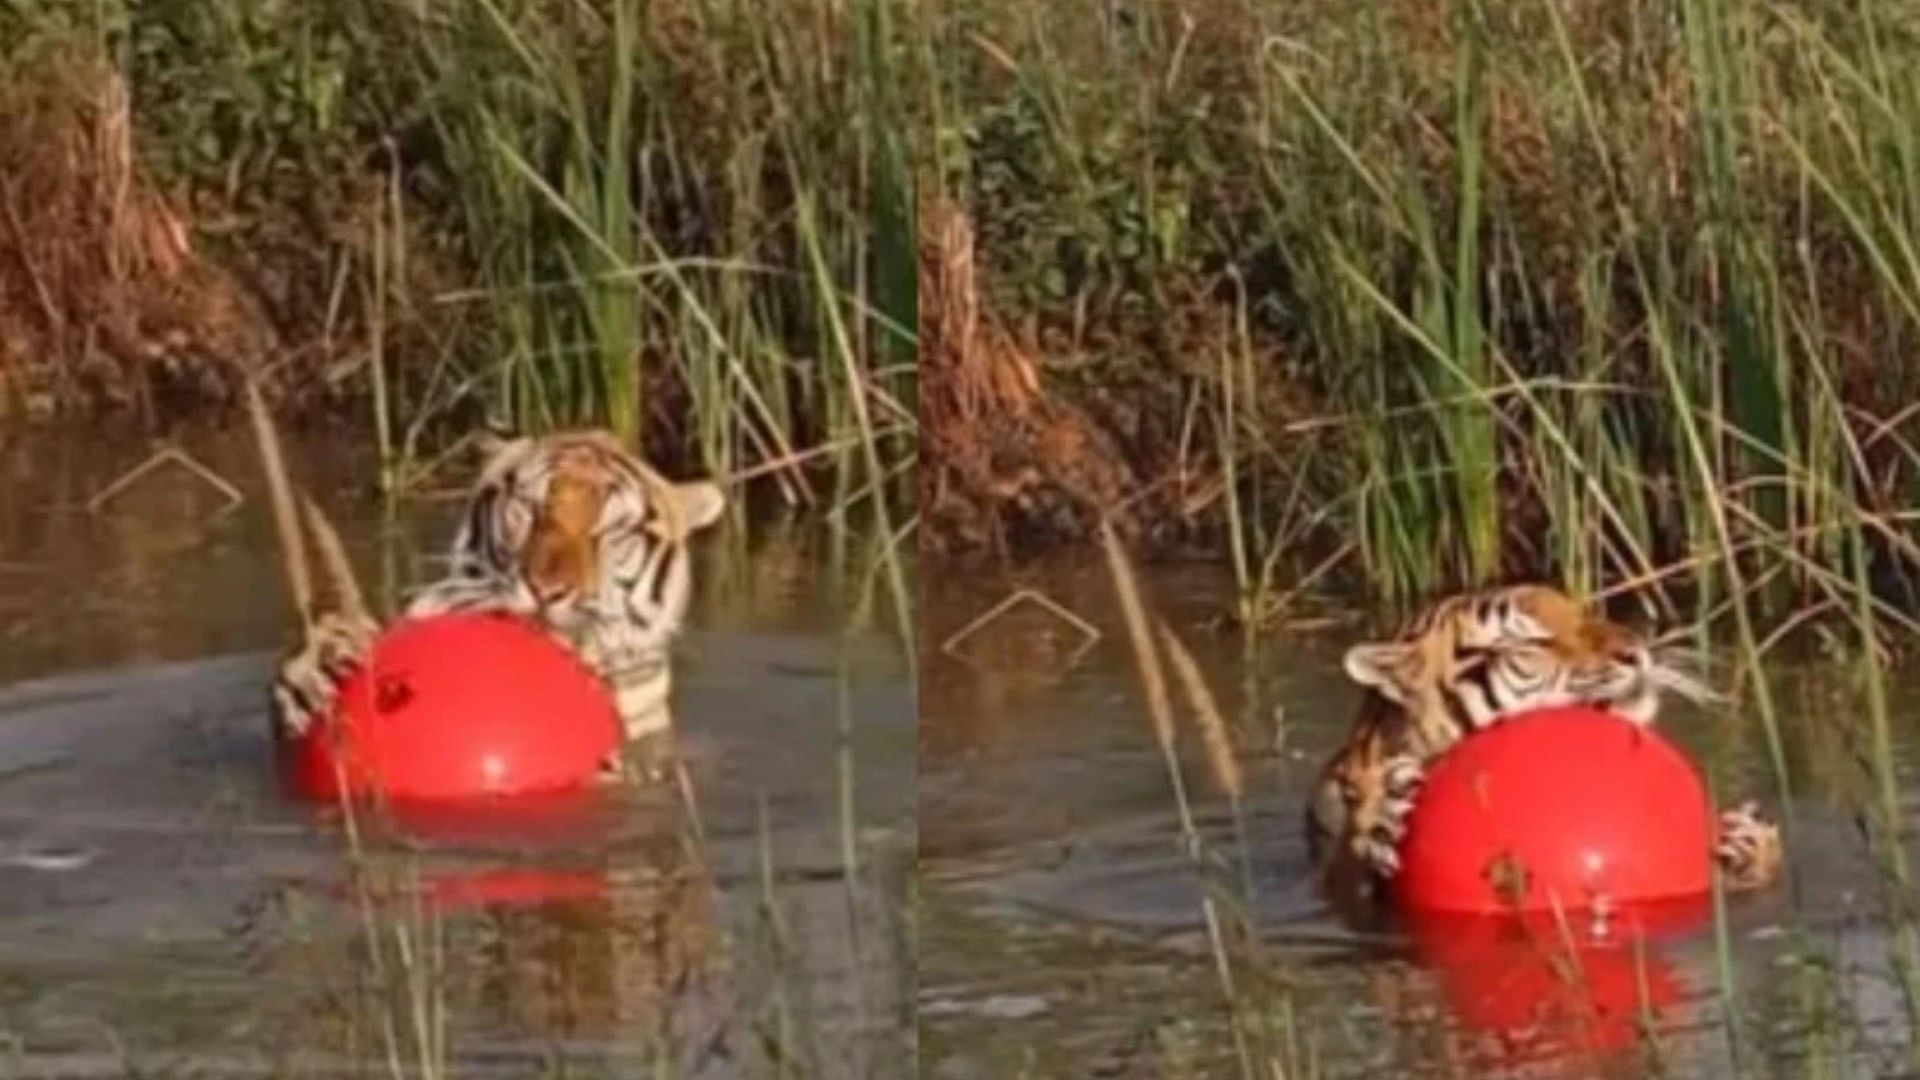 Tiger enjoys With Ball And Enjoying In Water Video Is Going Viral On Social Media